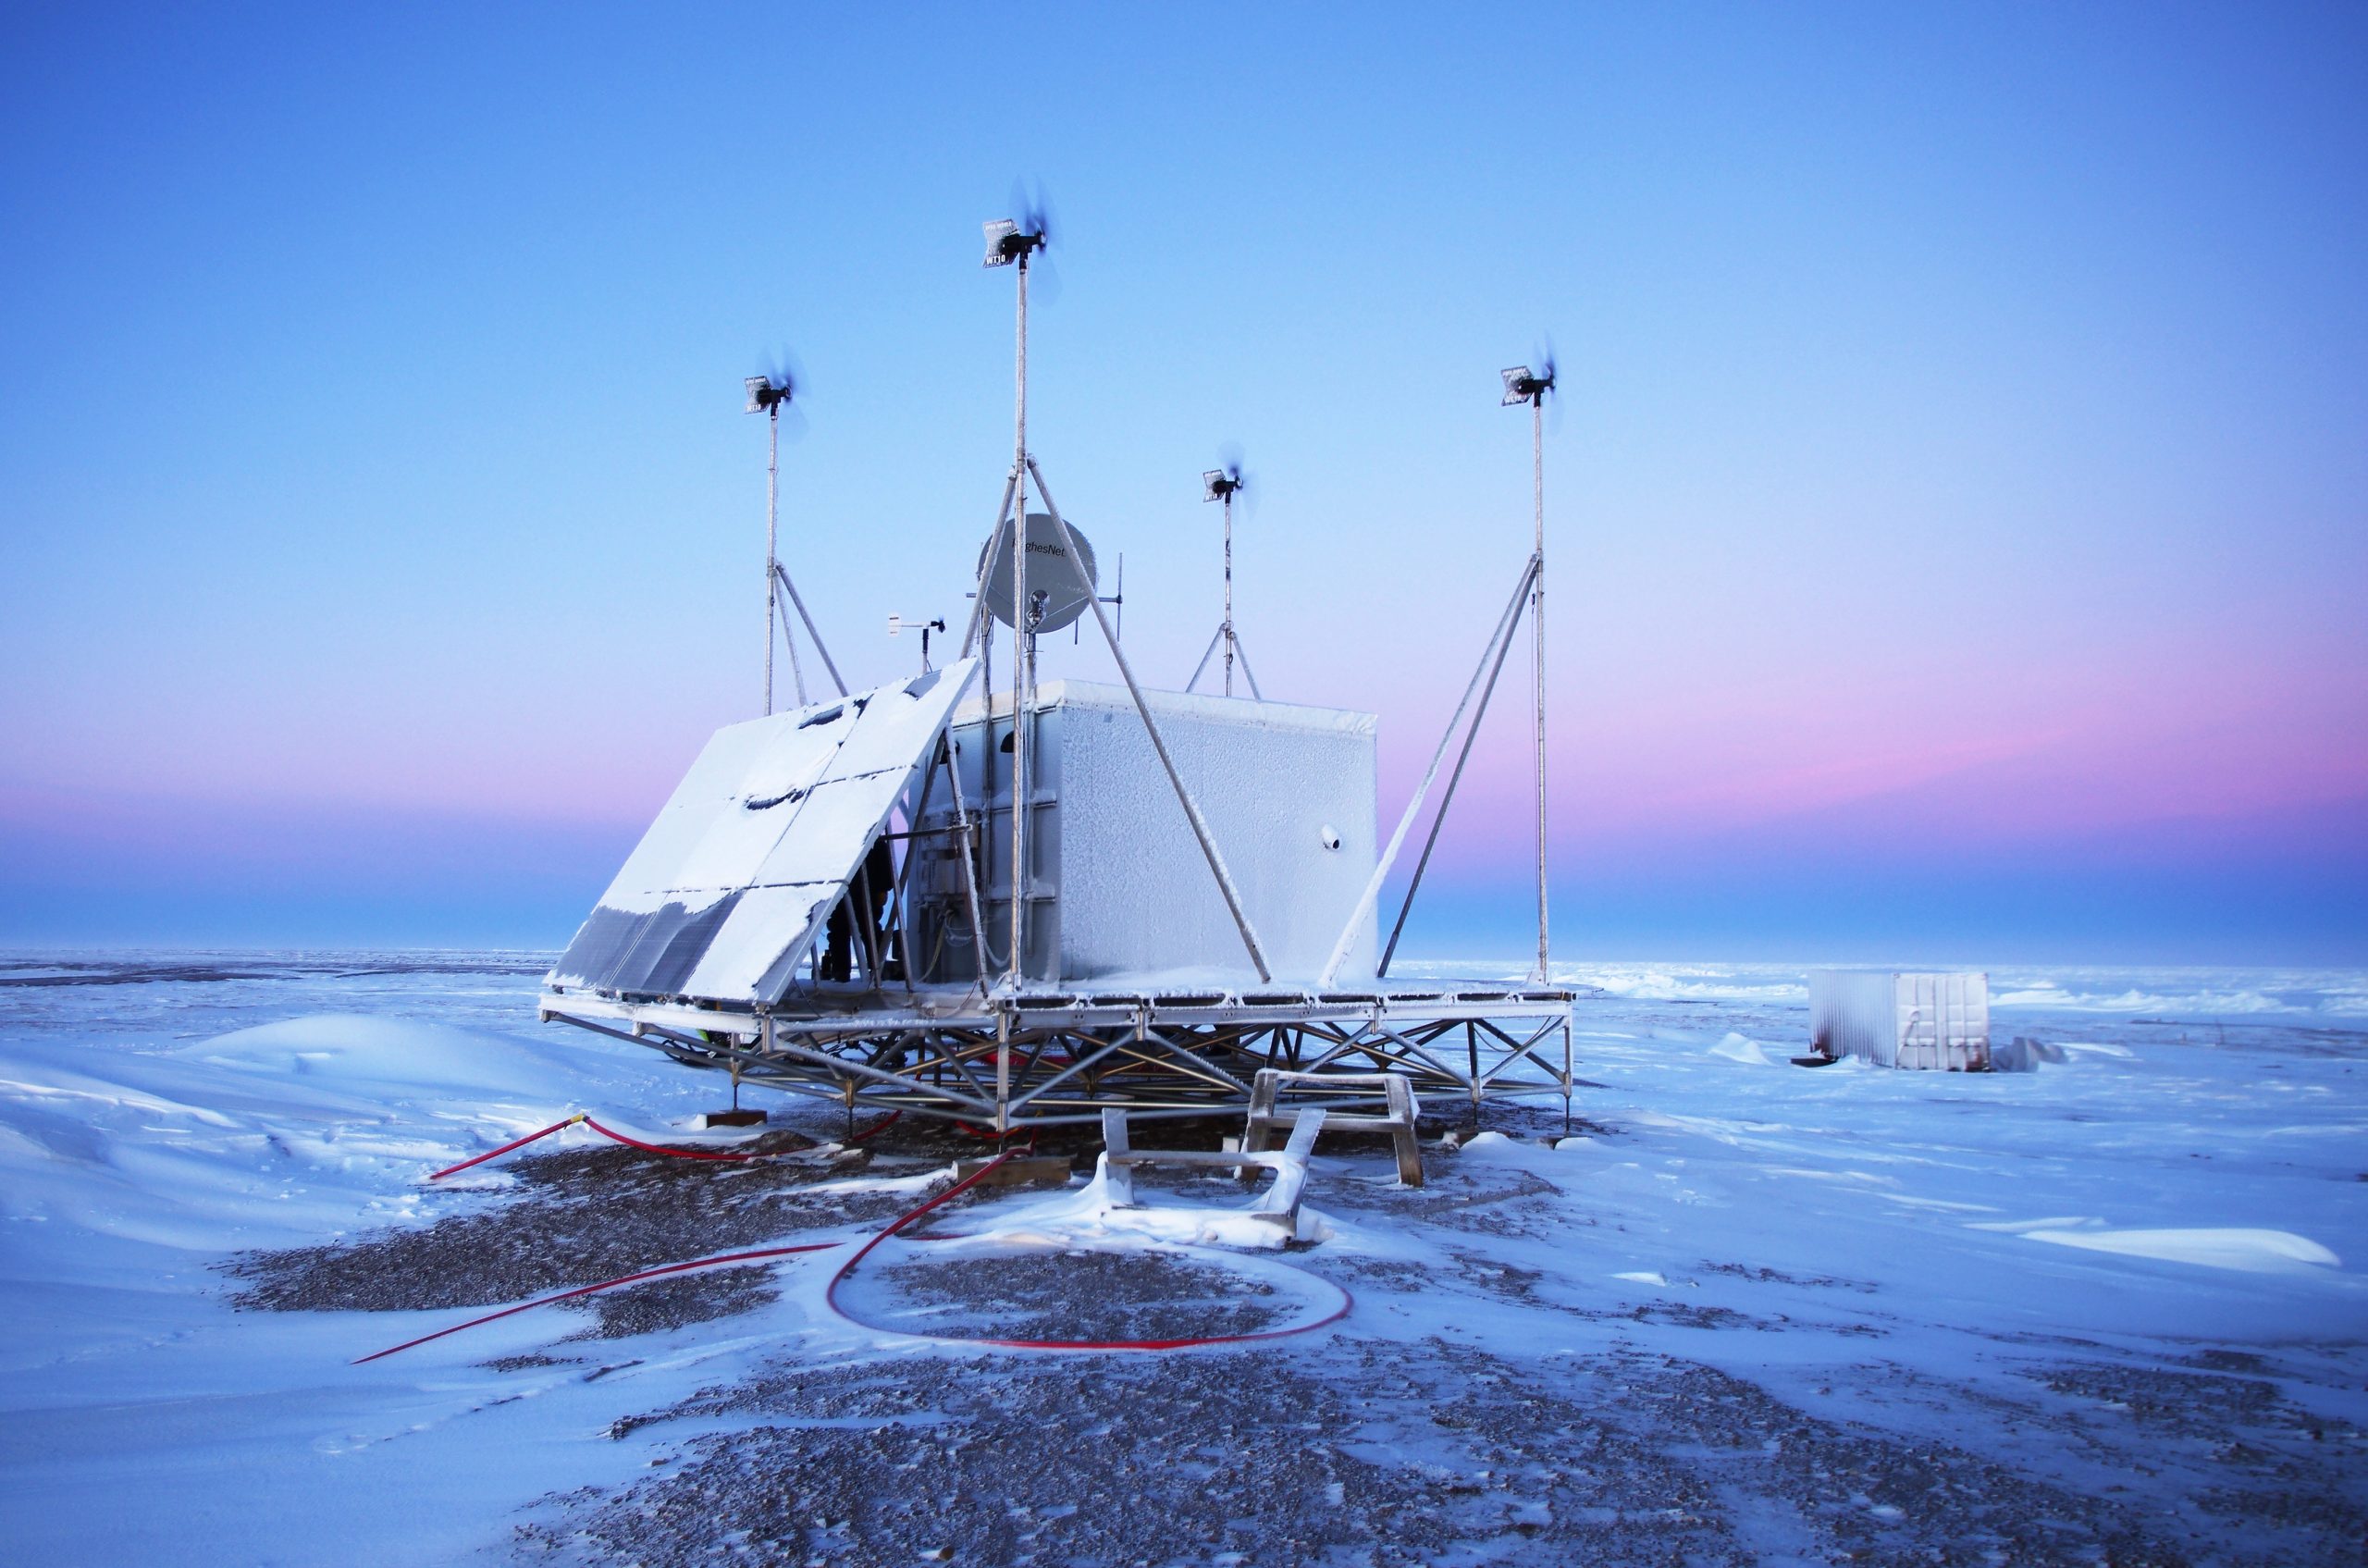 Photo by Hank Statscewich. A remote power module built at UAF operates at Cape Simpson, located 50 miles southeast of Utqiaġvik on Alaska's Arctic coast. The module has wind turbines, solar panels, wi-fi and electronics to support a high-frequency radar system that measures currents when the Beaufort Sea is ice-free.